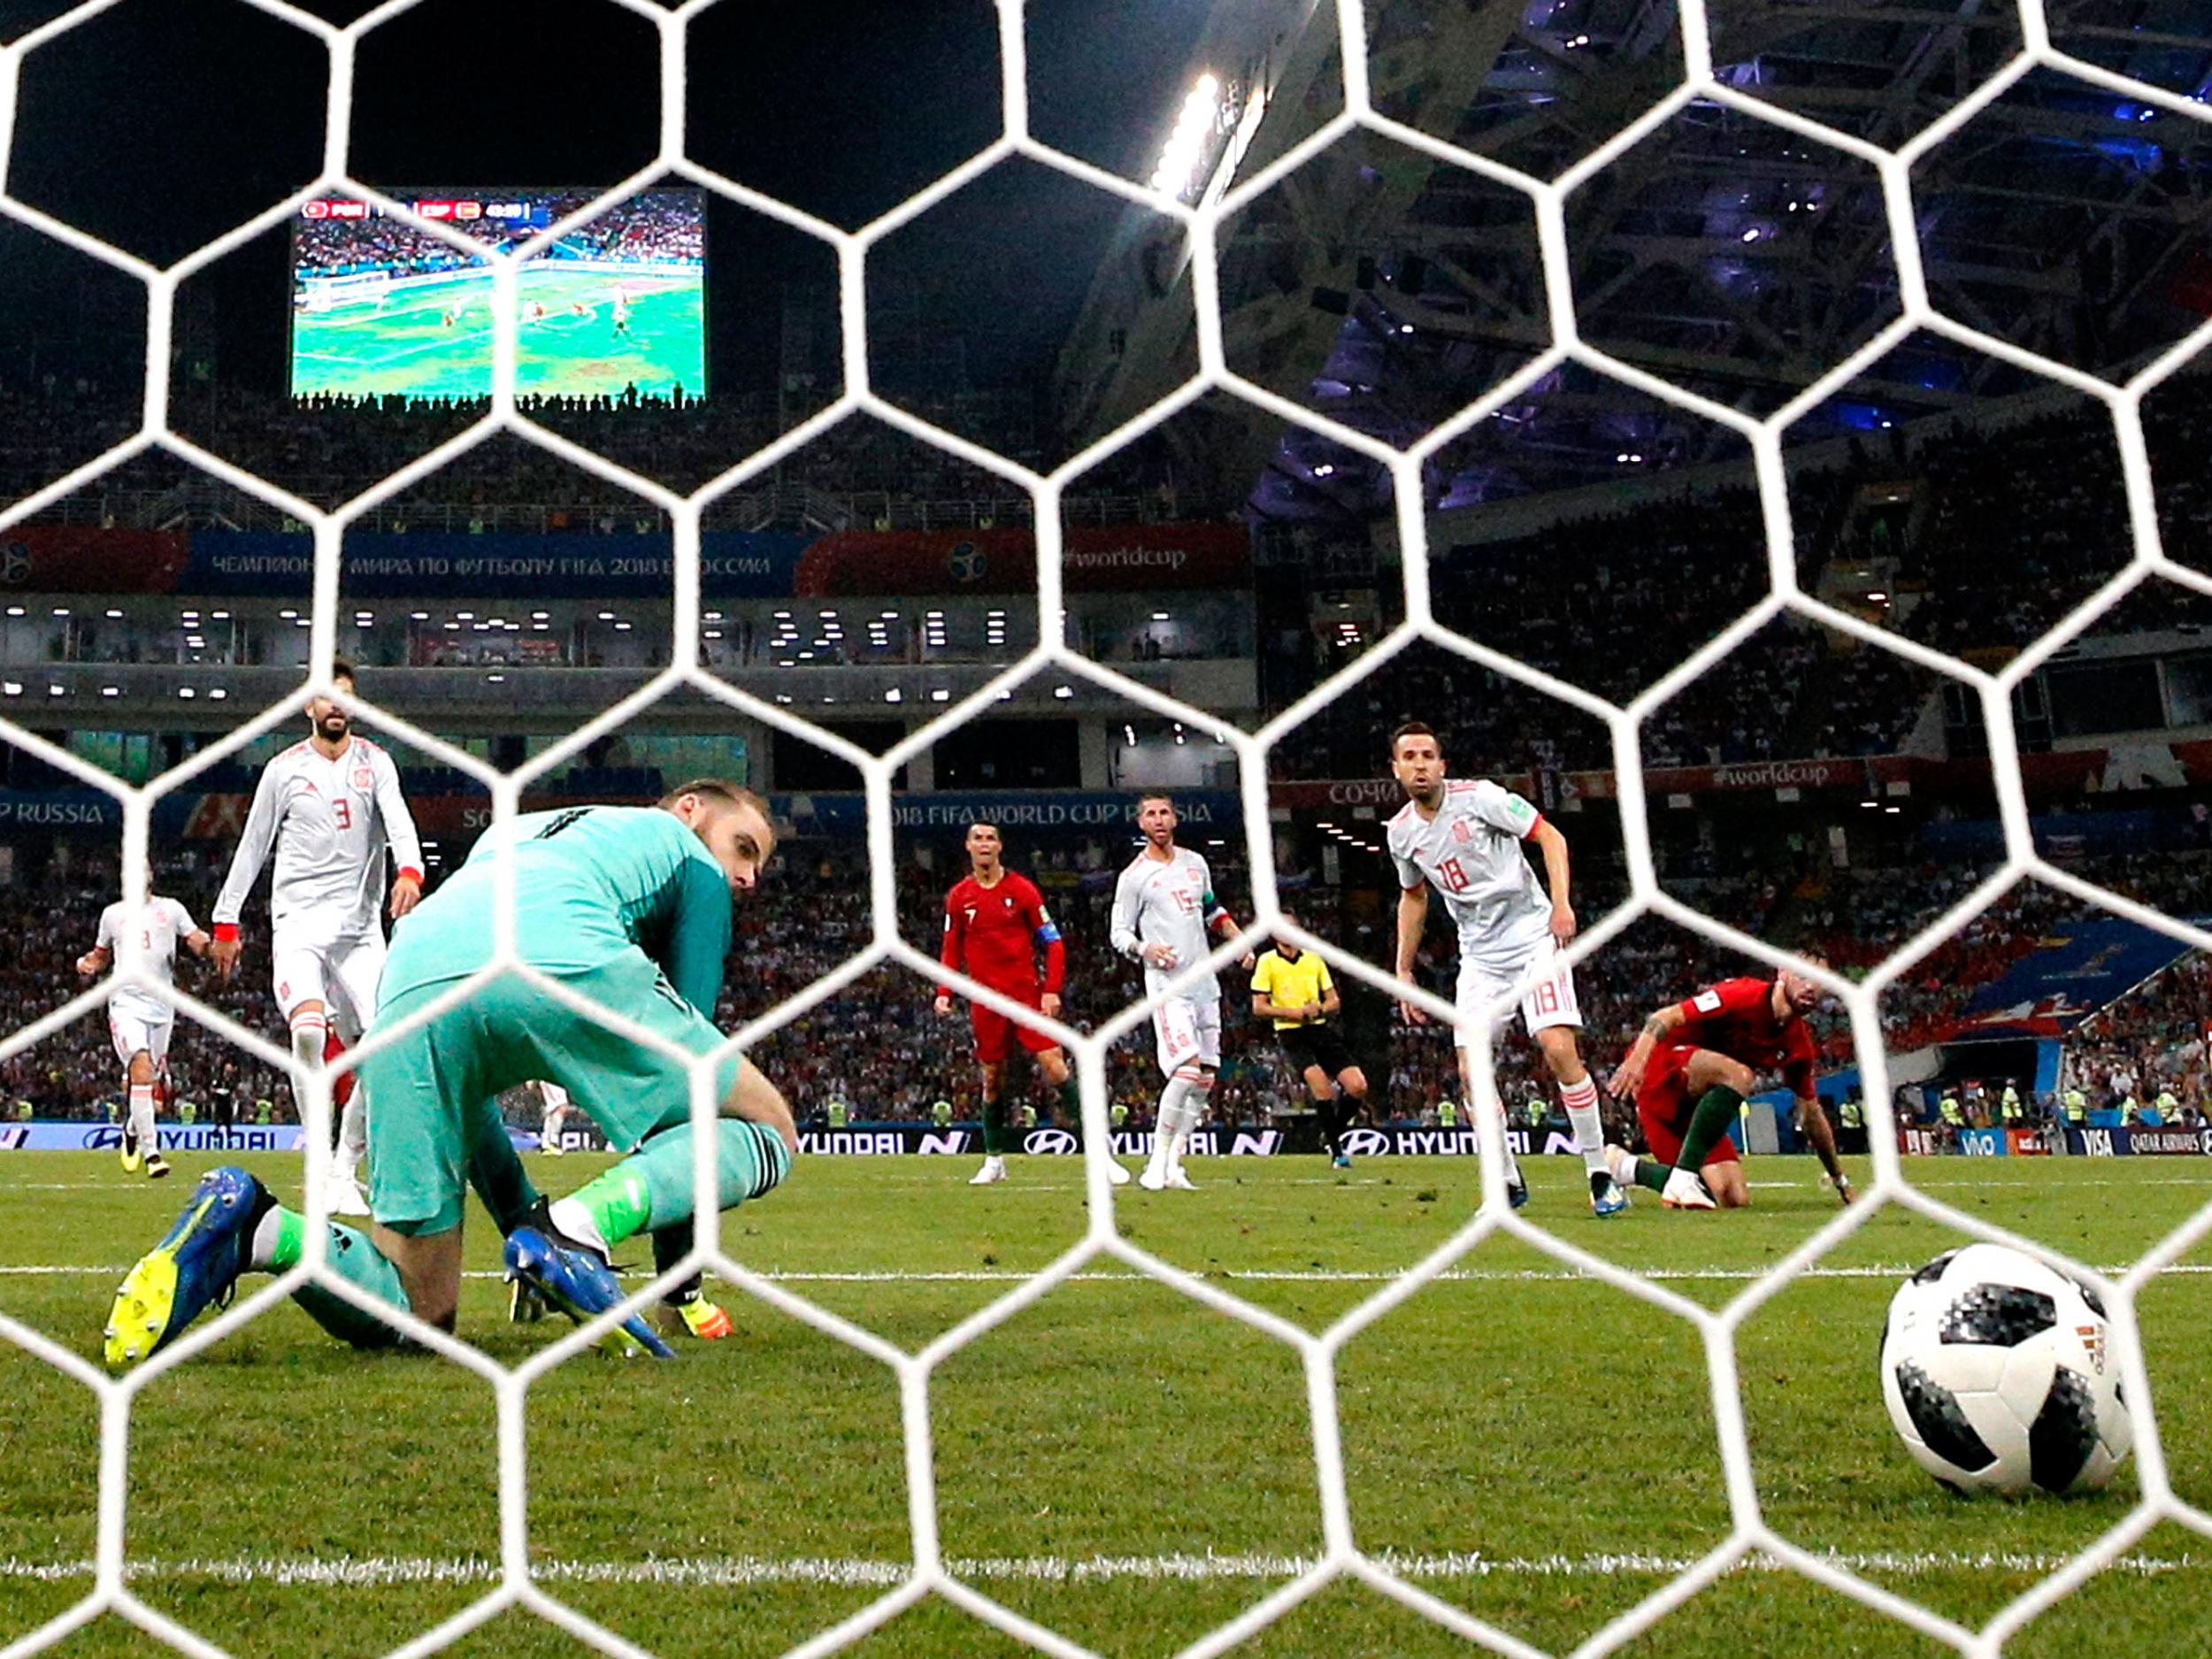 David de Gea bemoans lack of support in Spain after costly World Cup mistake against Portugal